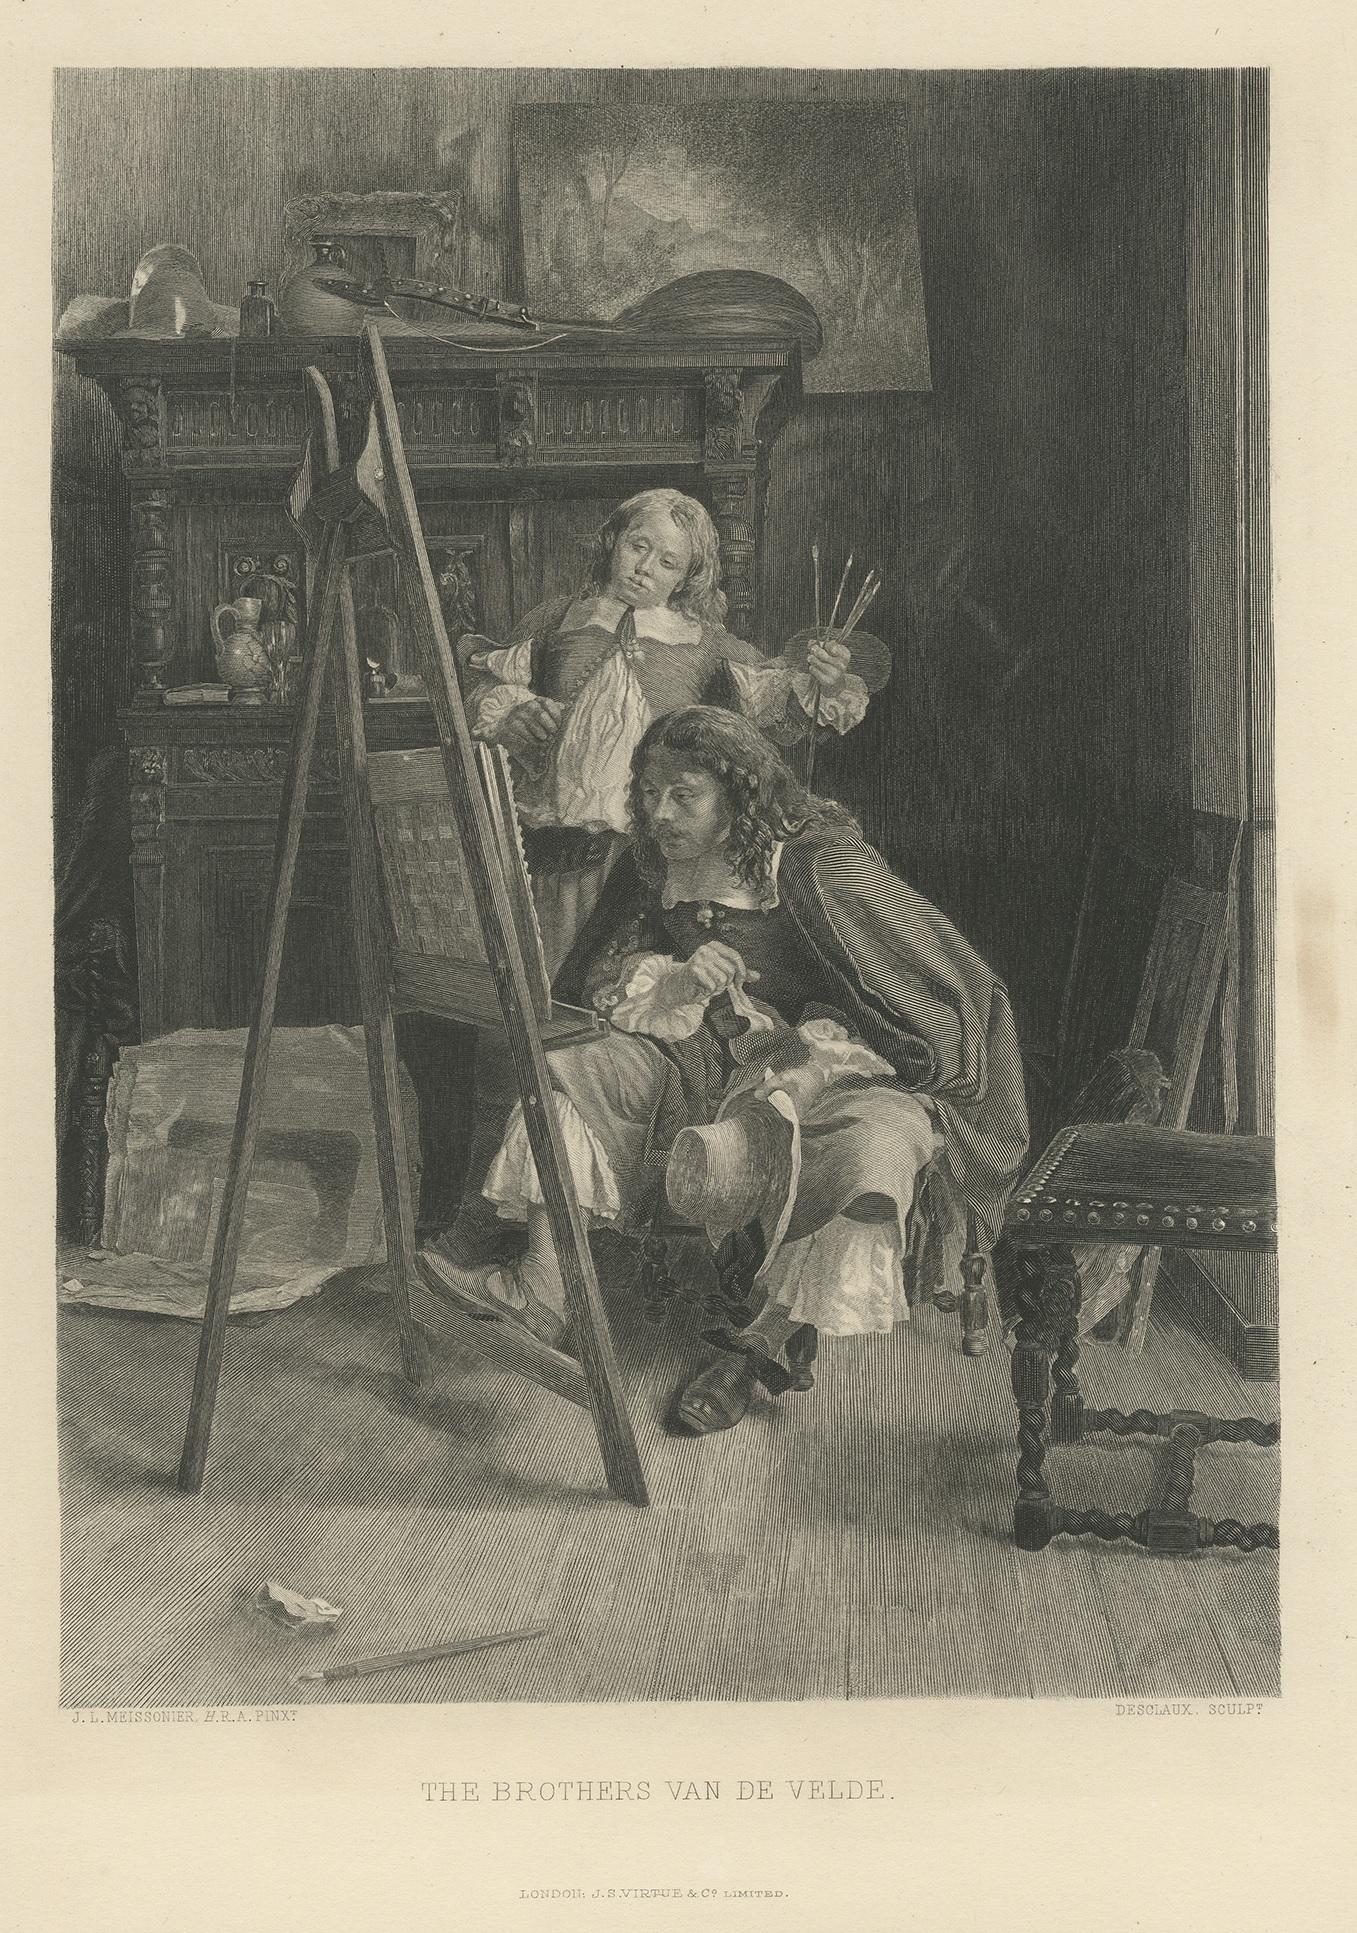 Antique print titled 'The Brothers van de Velde'. The painters Willem Van de Velde the younger and Adriaen van de Velde studying a painting on an easel. This print originates from 'MEISSONIER: A Collection of Etchings and Engravings of Twelve of the